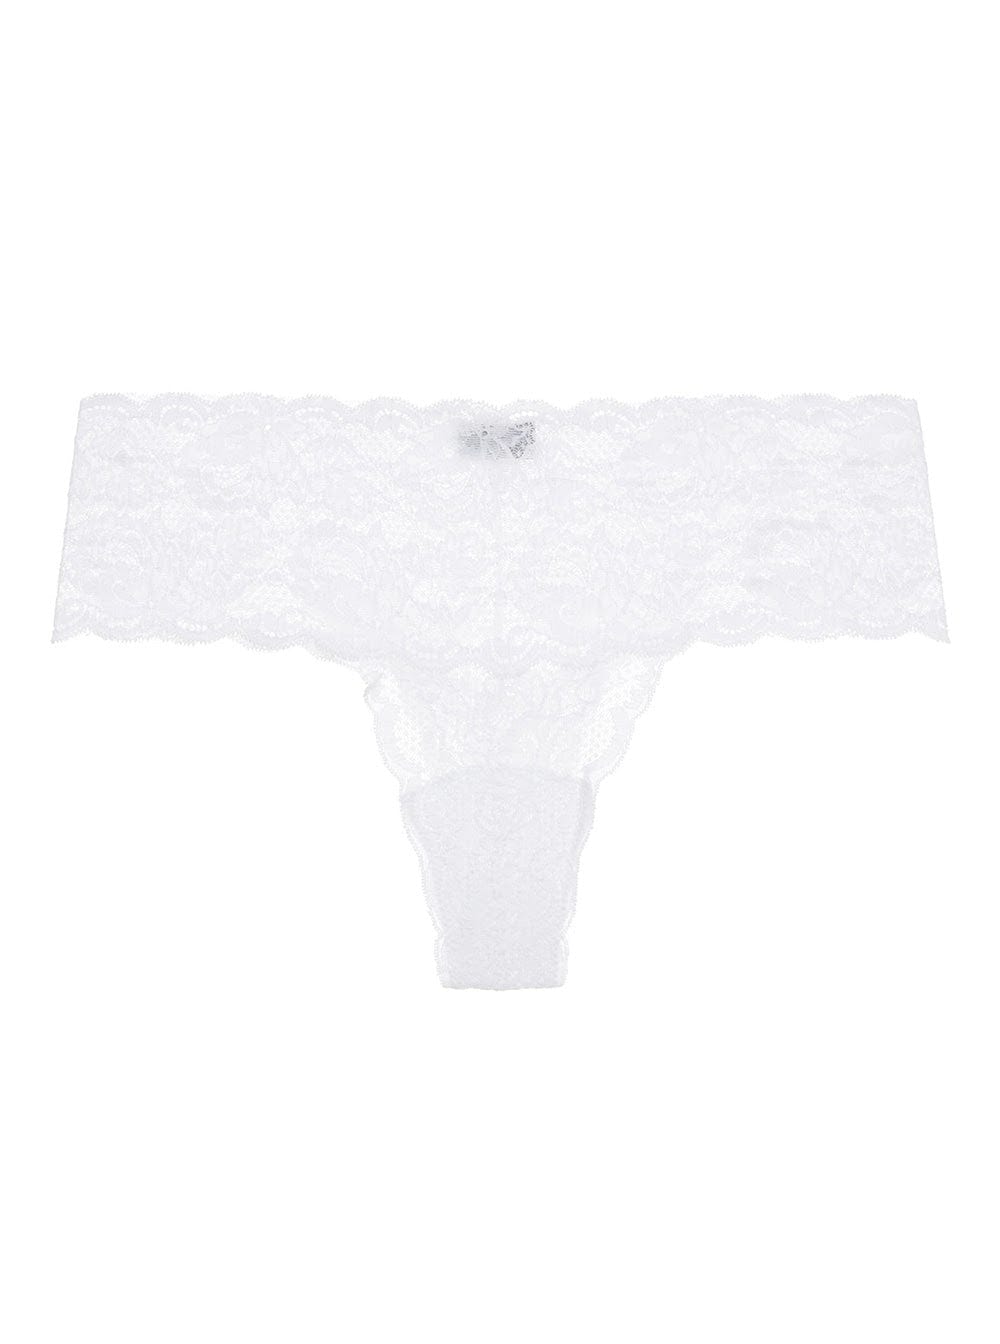 Cosabella Thongs Never Say Never Comfy Cutie Thong - Sette